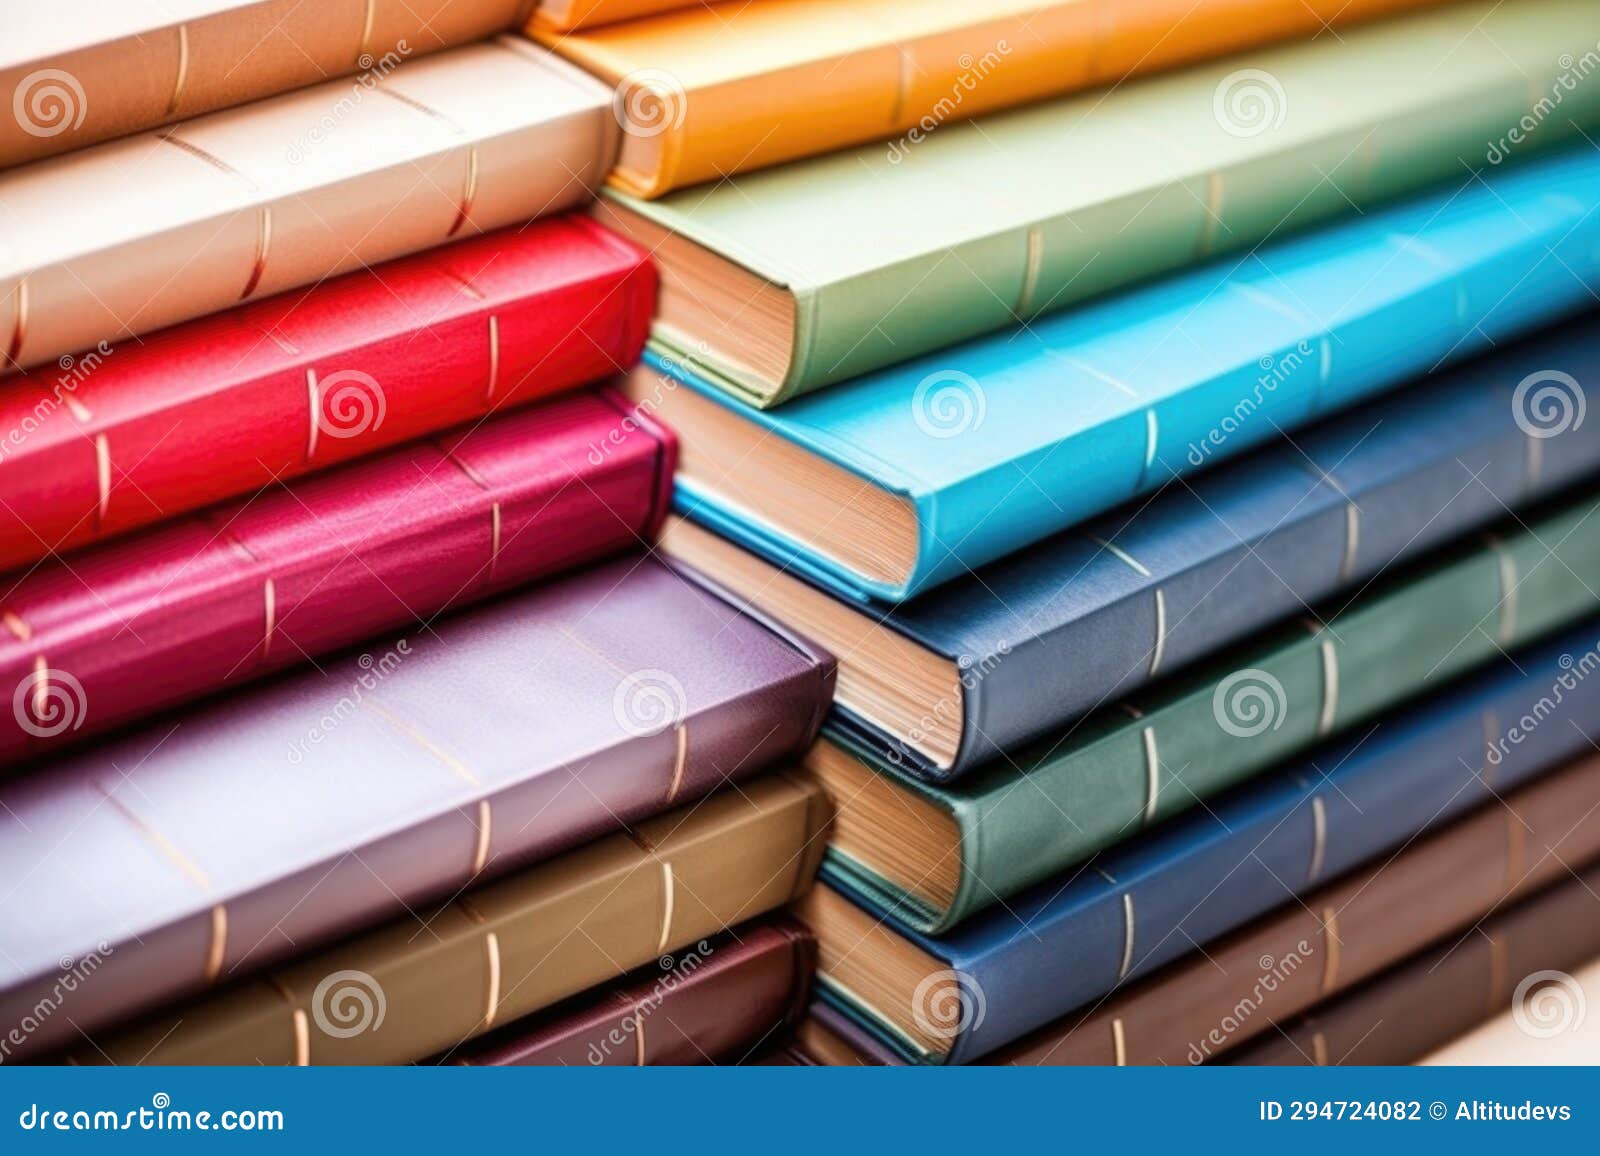 stacked dictionaries showing different colors and sizes